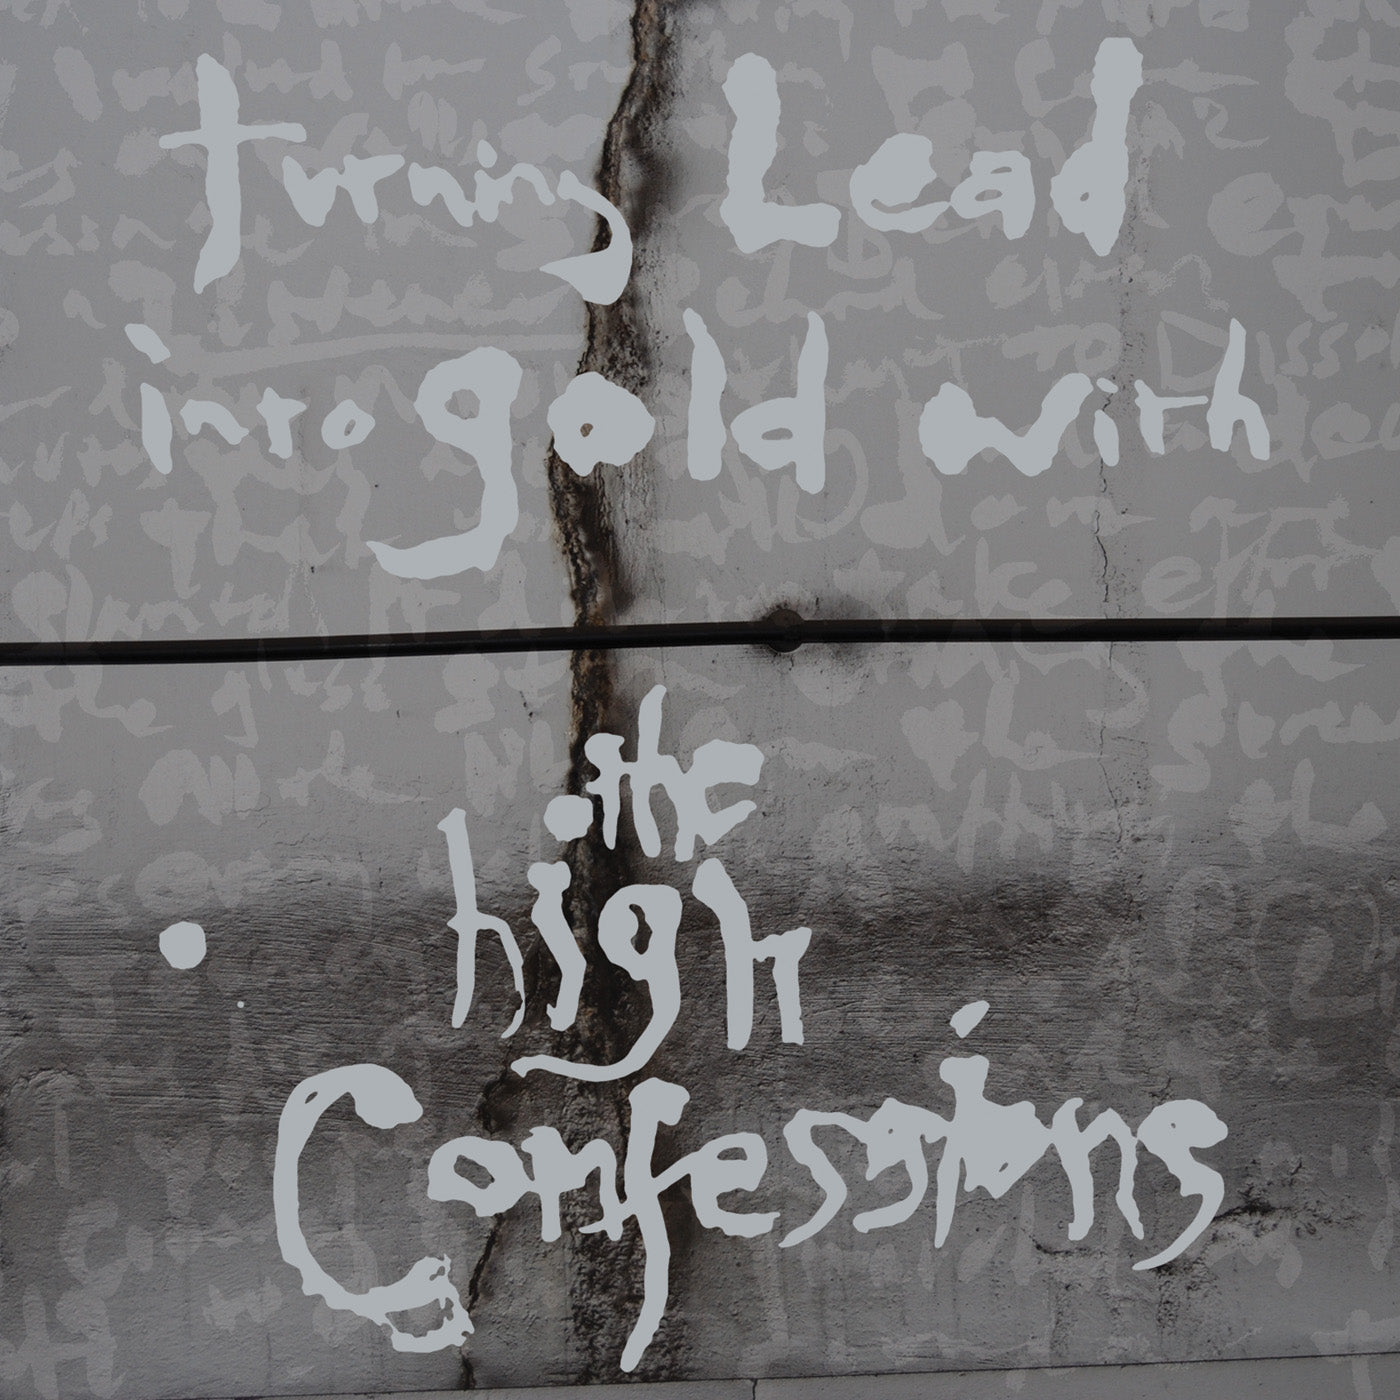 The High Confessions "Turning Lead into Gold with The High Confessions" CD